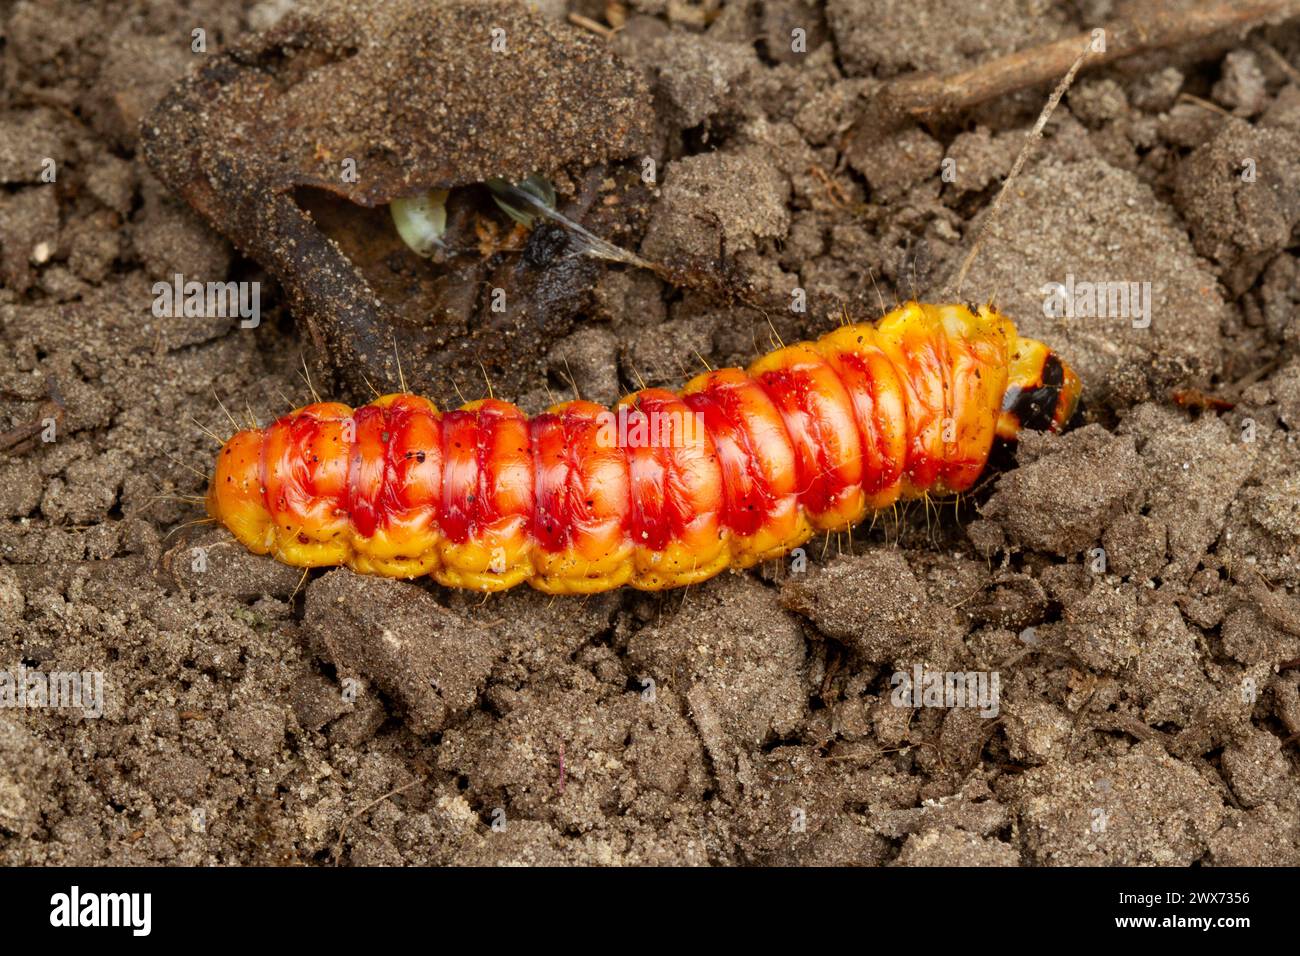 Caterpillar of Goat moth. Digging in garden unintentionally damaged its pupa, in which it would have developed into a moth. Pupa in background. Stock Photo